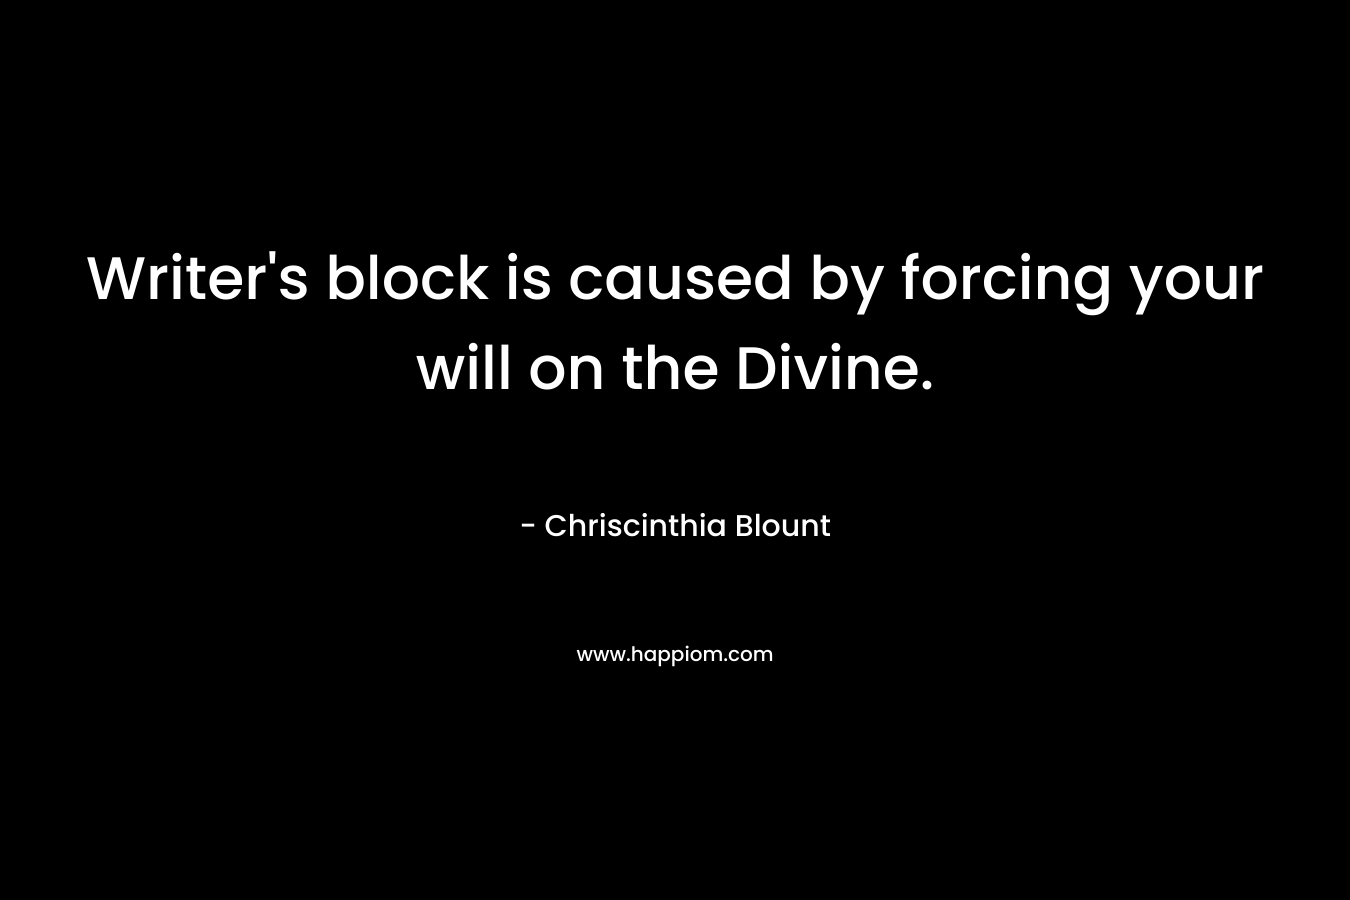 Writer’s block is caused by forcing your will on the Divine. – Chriscinthia Blount